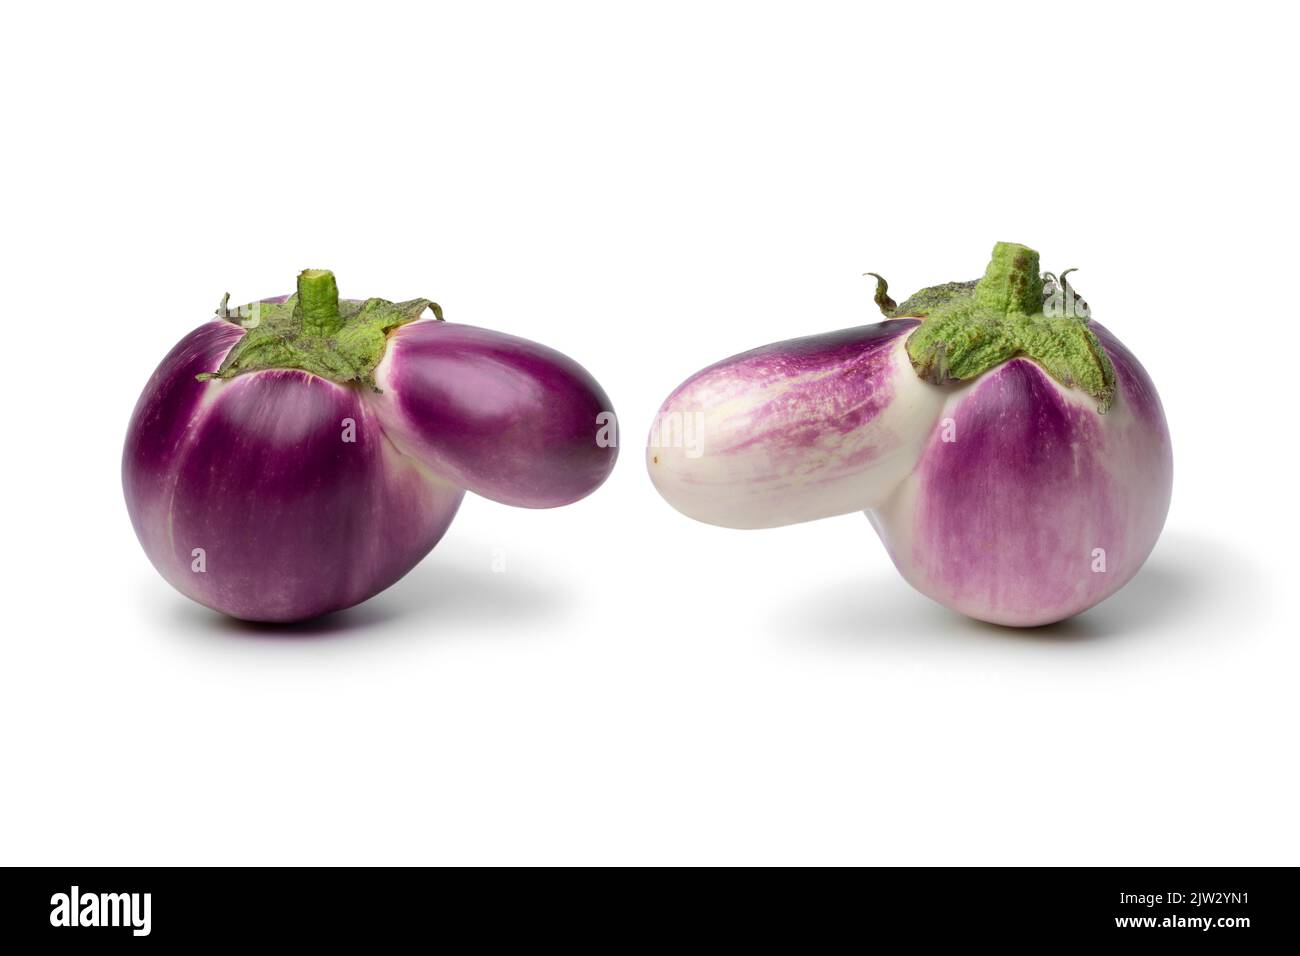 Pair of deformed fresh purple eggplant with a nose close up isolated on white background Stock Photo